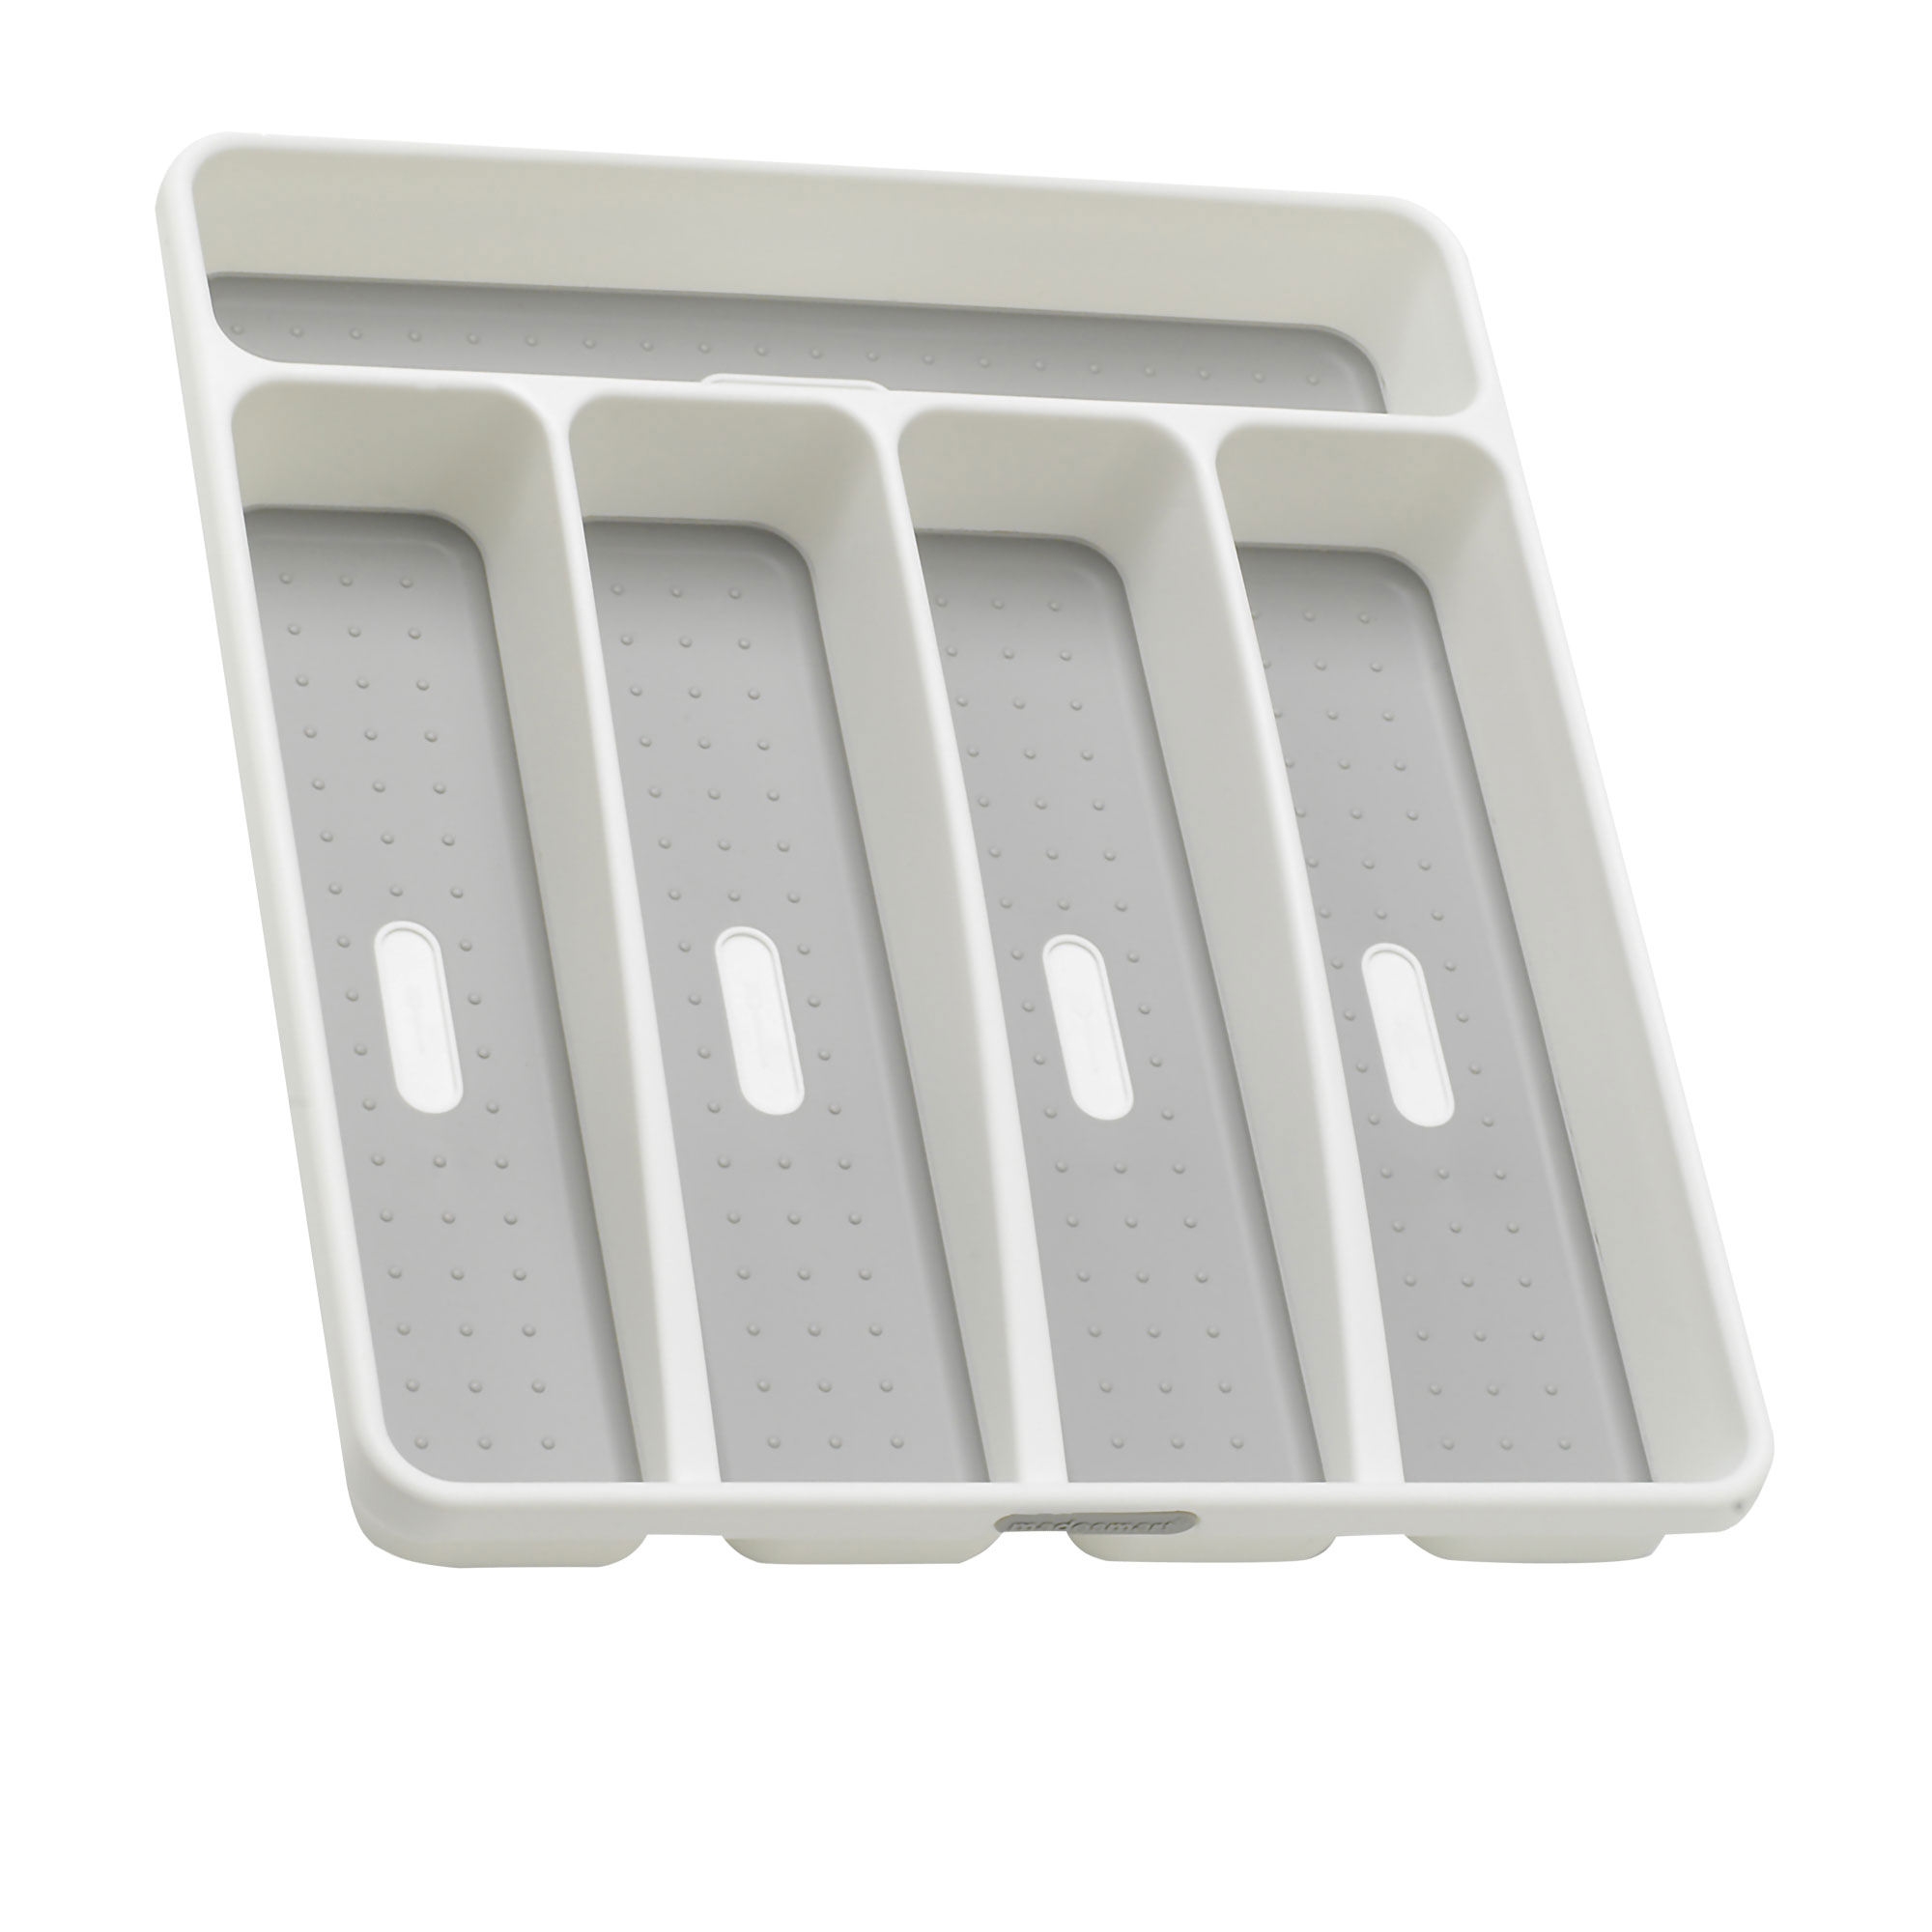 Madesmart Cutlery Tray 5 Compartment White Image 2